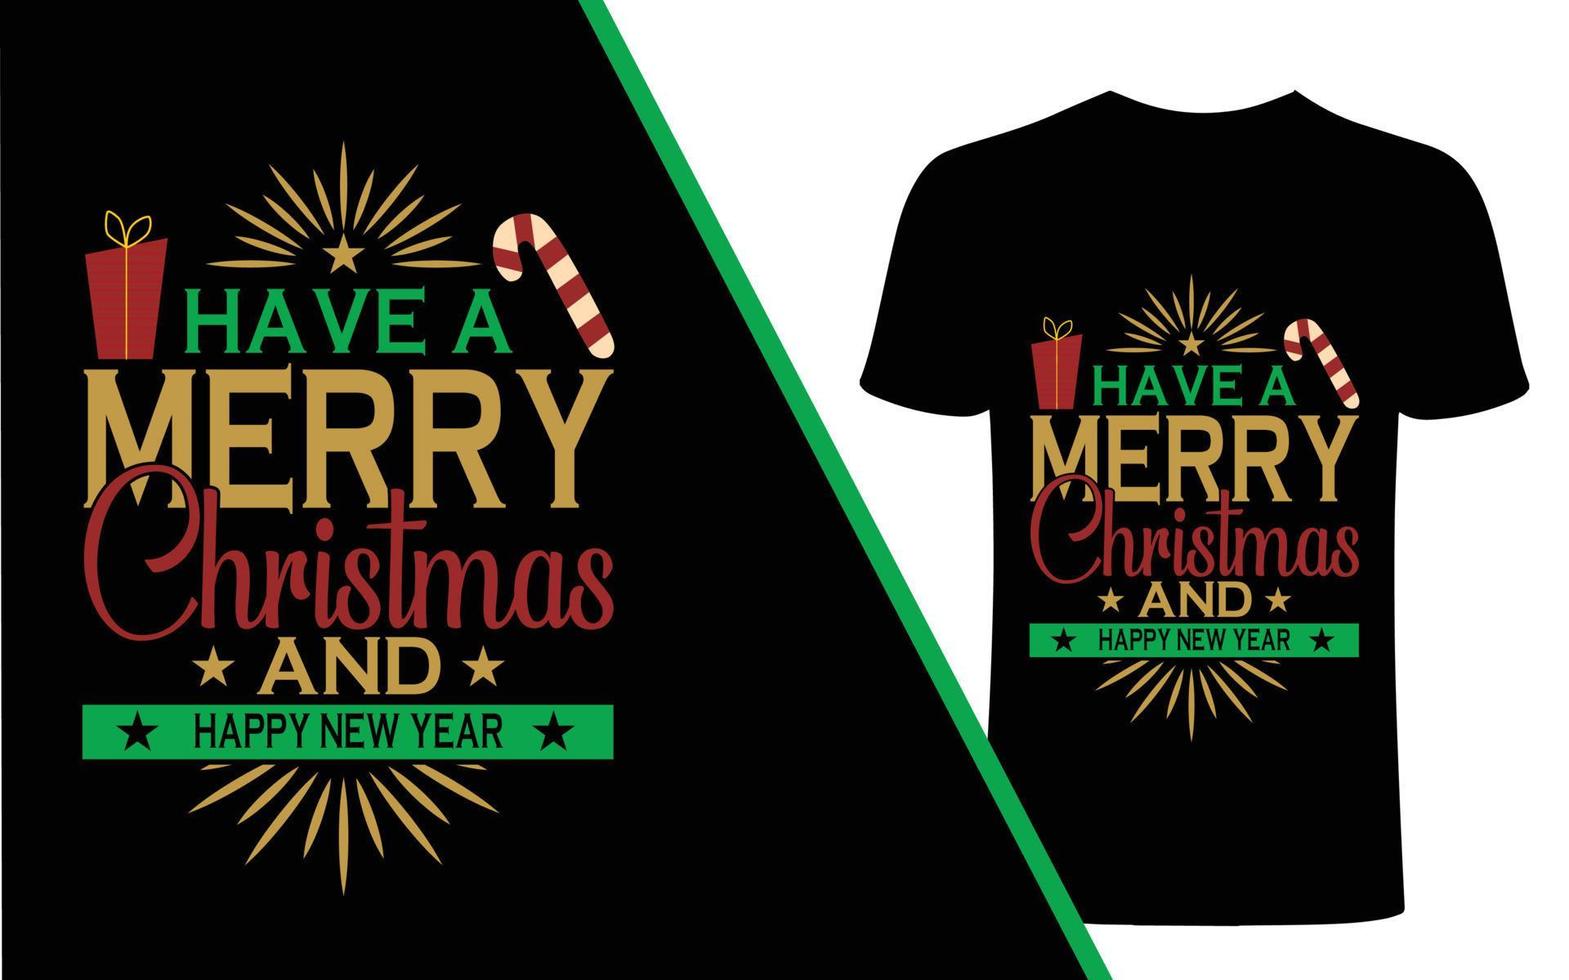 Have a merry christmas and Happy new year t shirt design vector